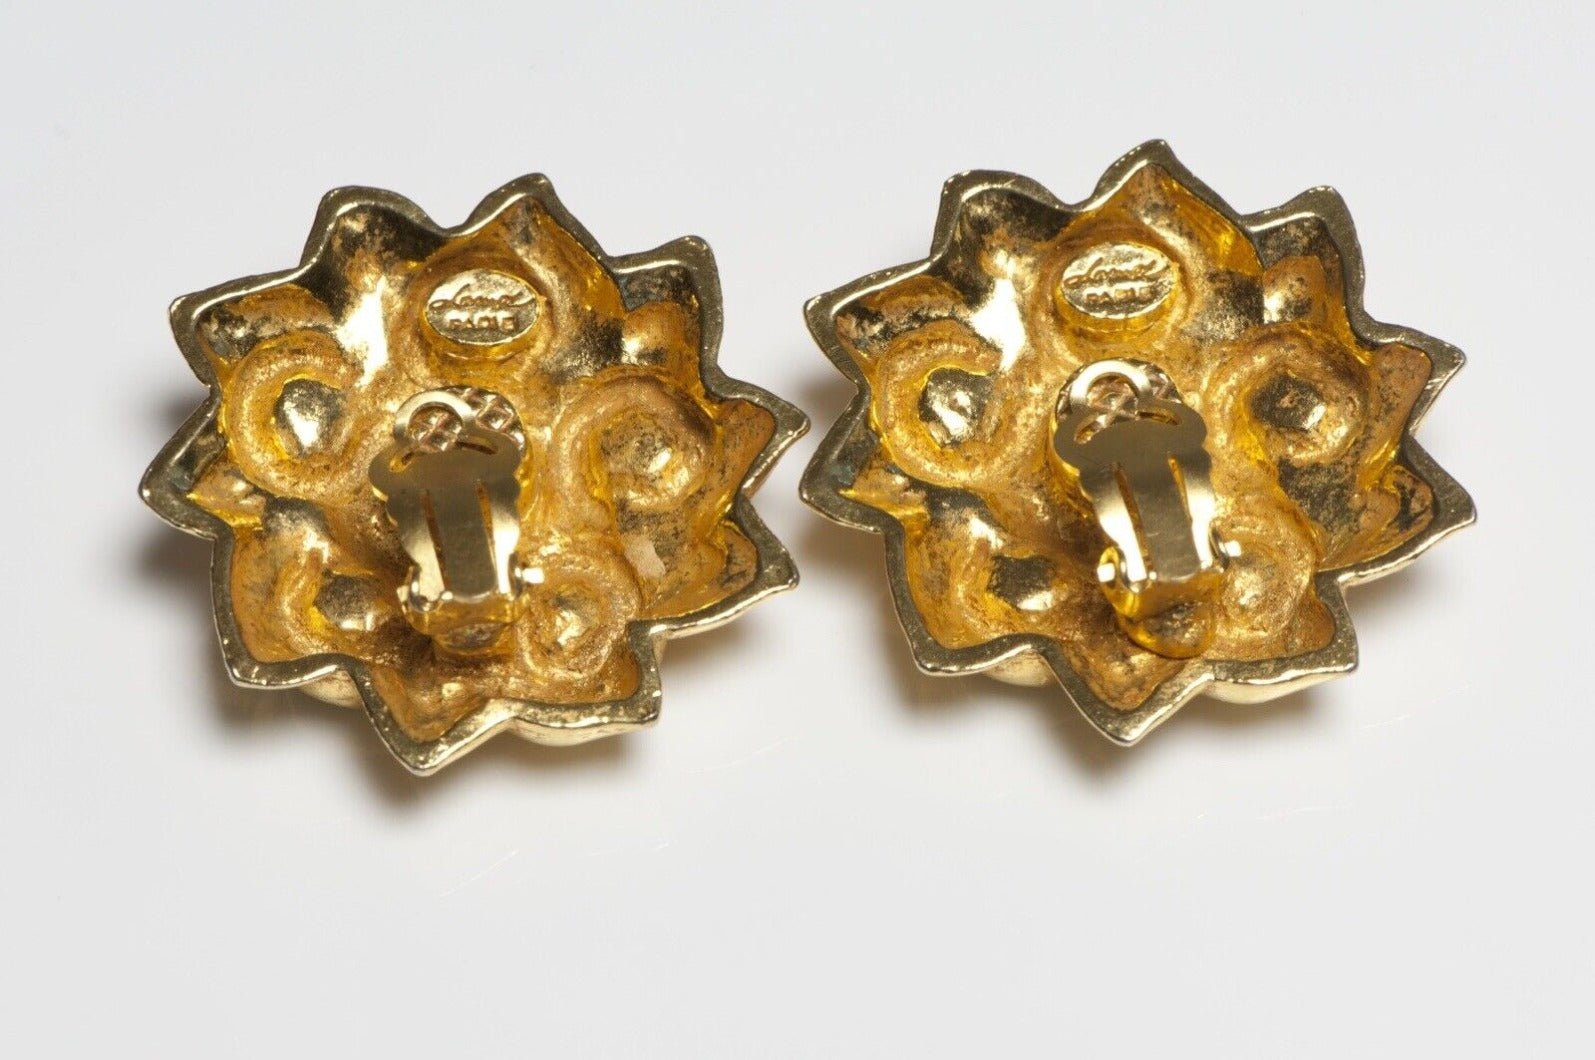 Vintage 1980's French Gold Plated Crystal Flower Earrings